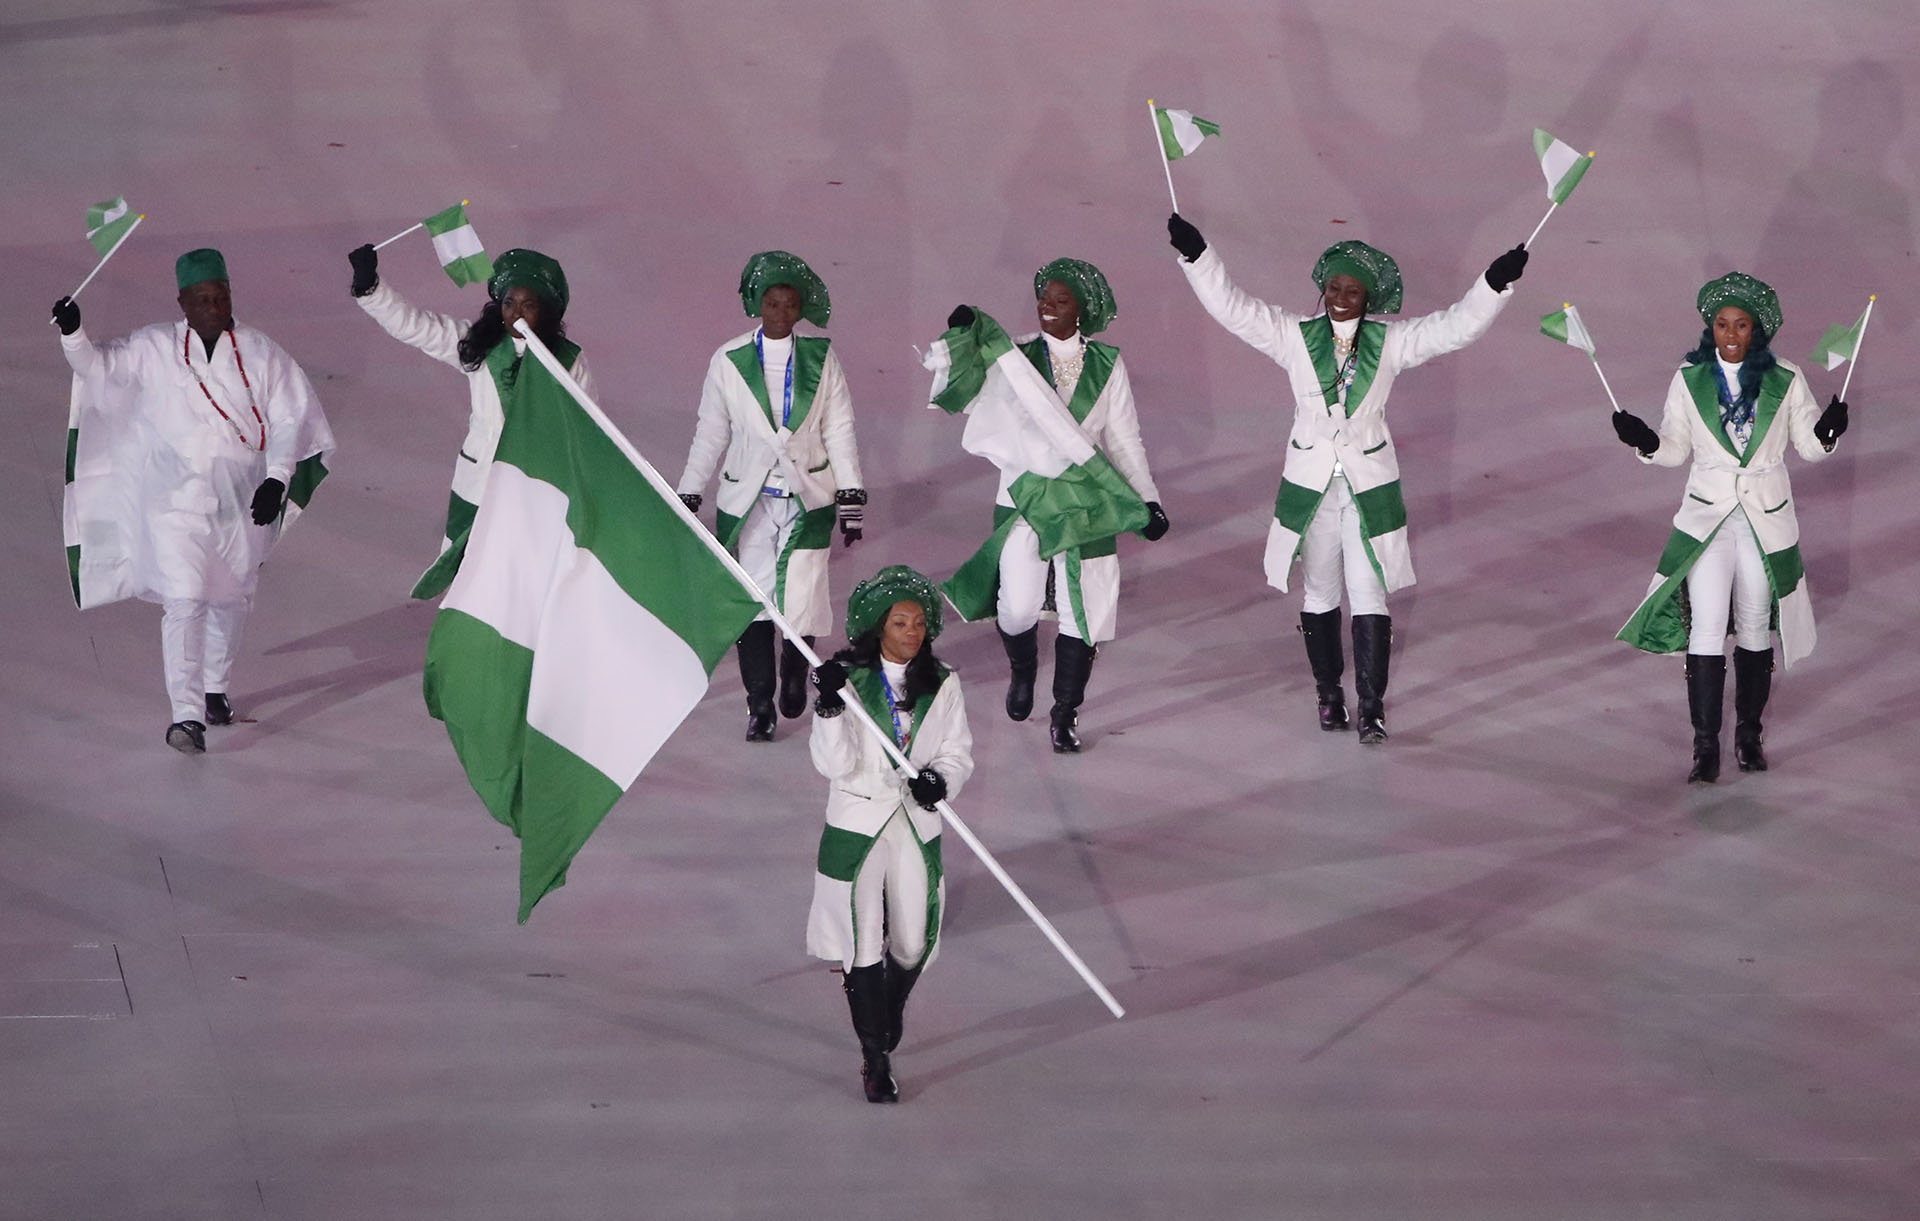 Pyeongchang 2018 Winter Olympics – Opening ceremony – Pyeongchang Olympic Stadium - Pyeongchang, South Korea – February 9, 2018 - Ngozi Onwumere of Nigeria carries the national flag. REUTERS/Stefano Rellandini